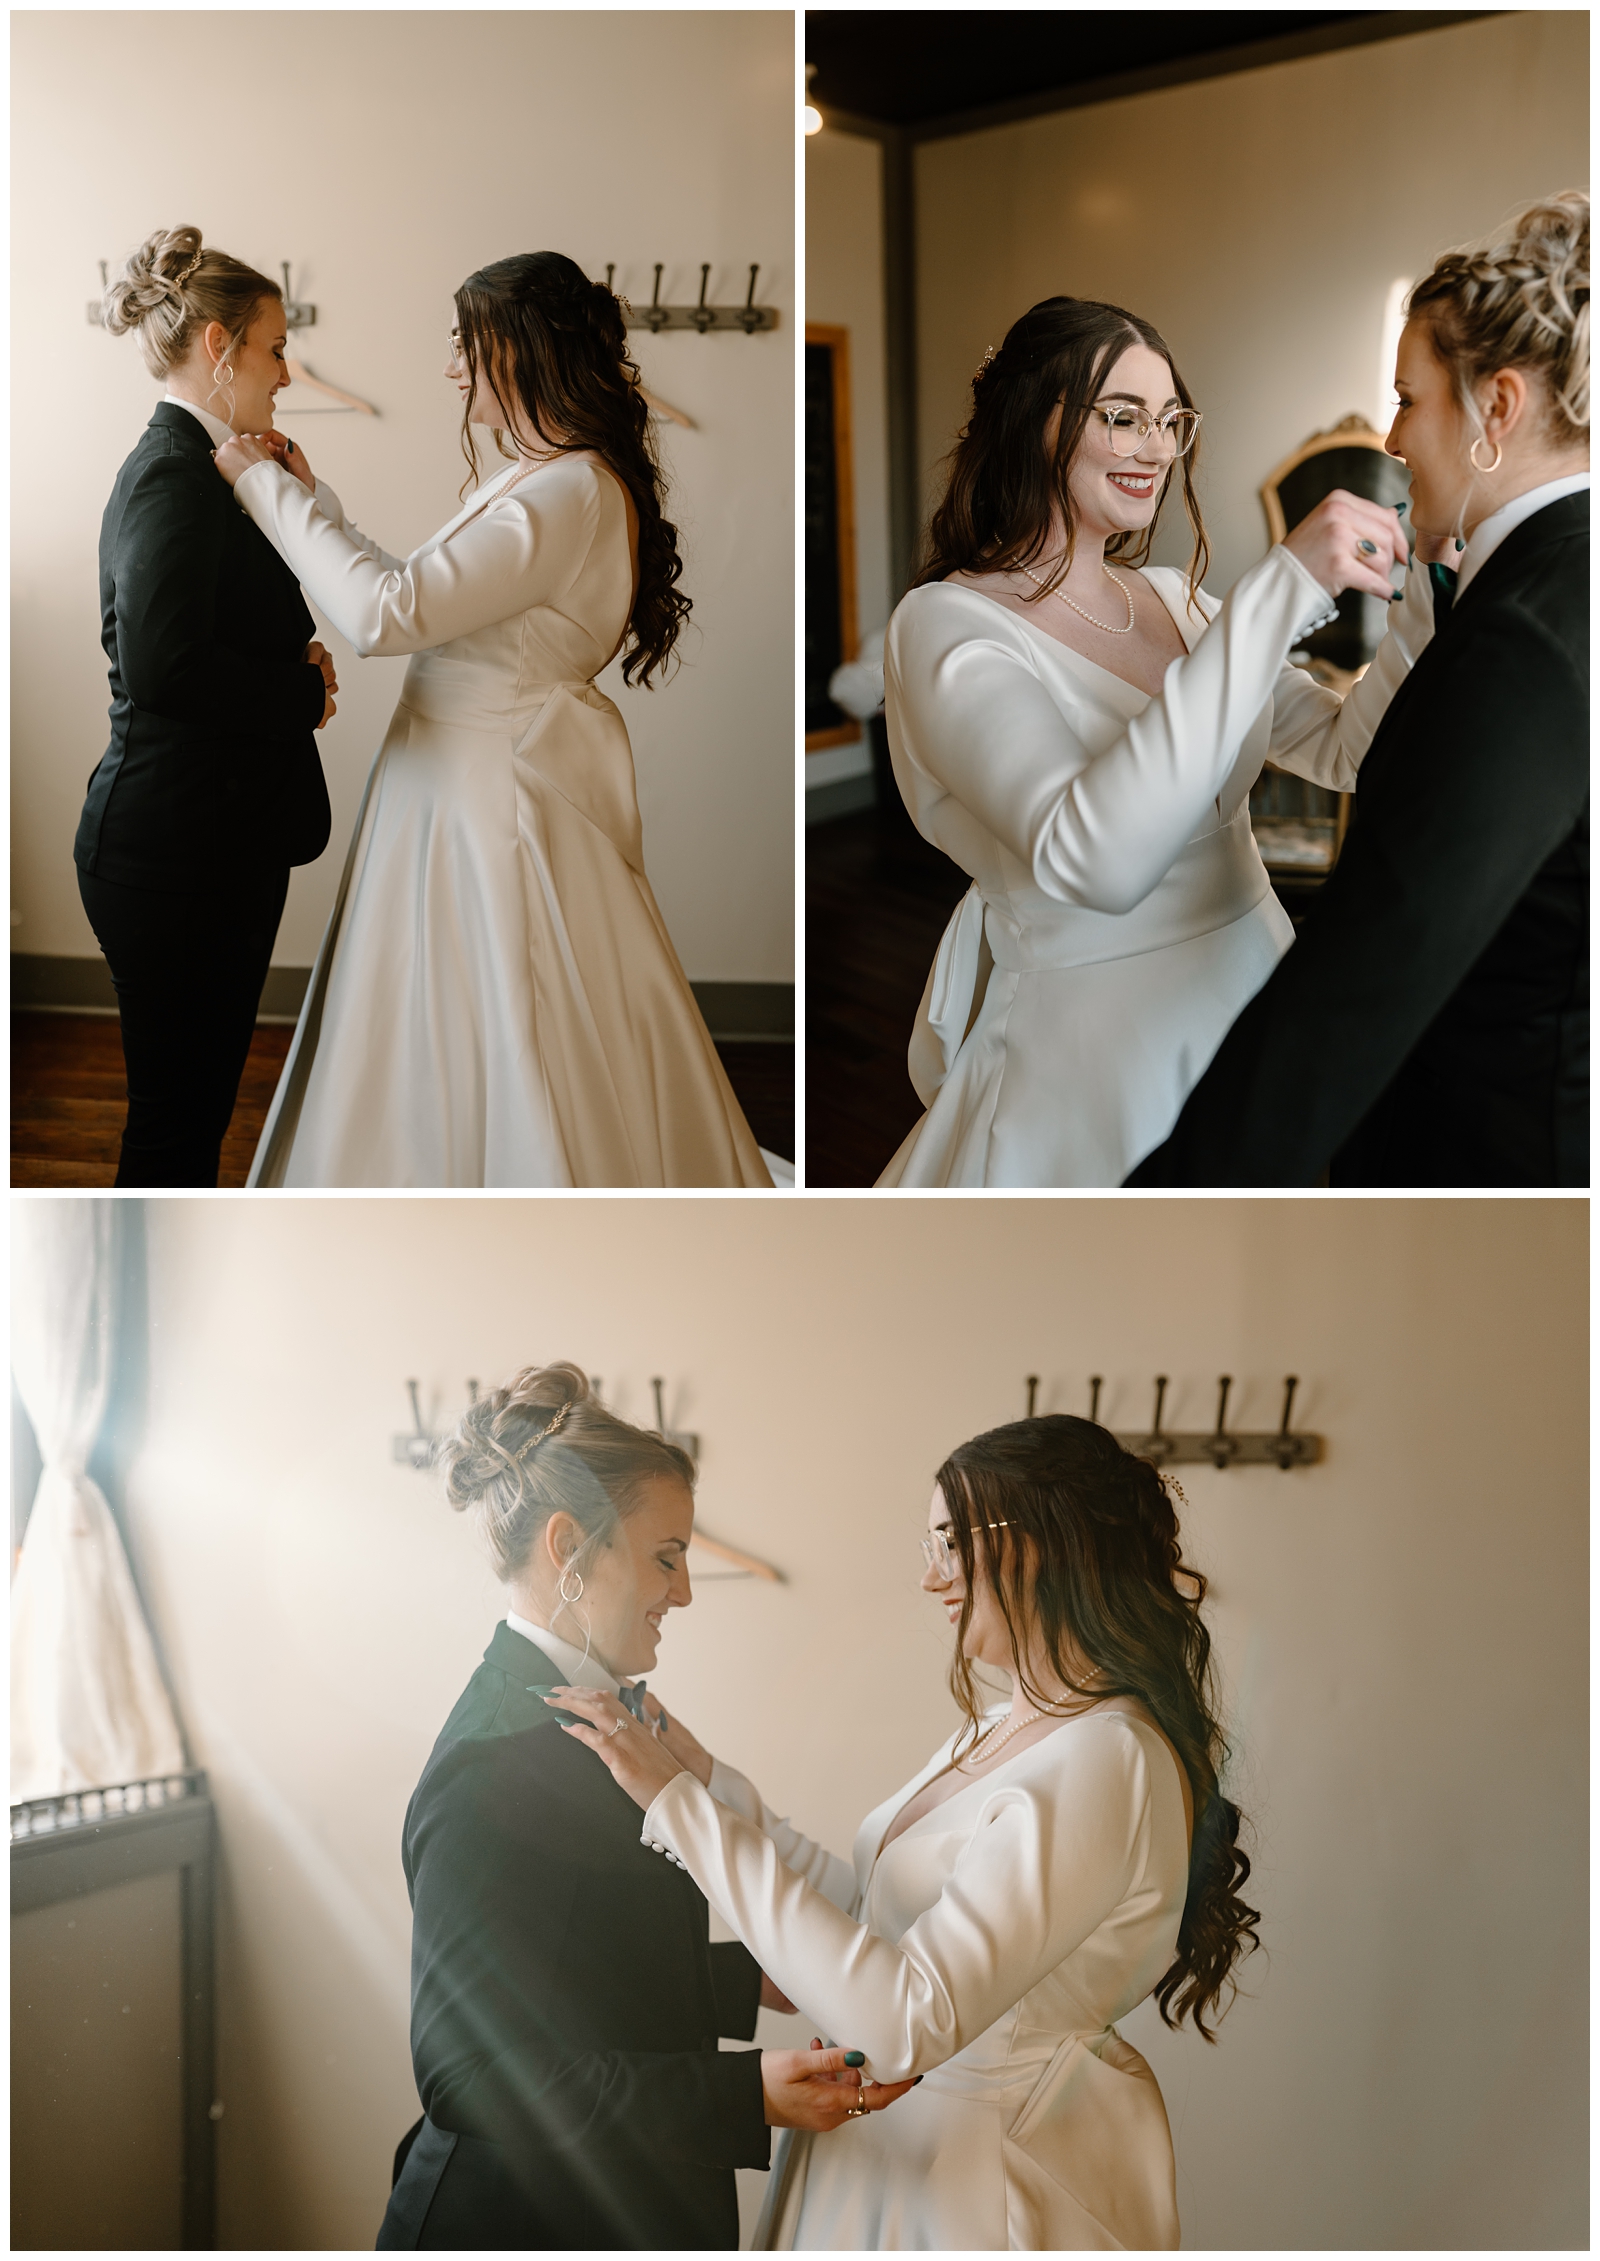 Beautiful brides getting ready for their wedding day in Madison, NC